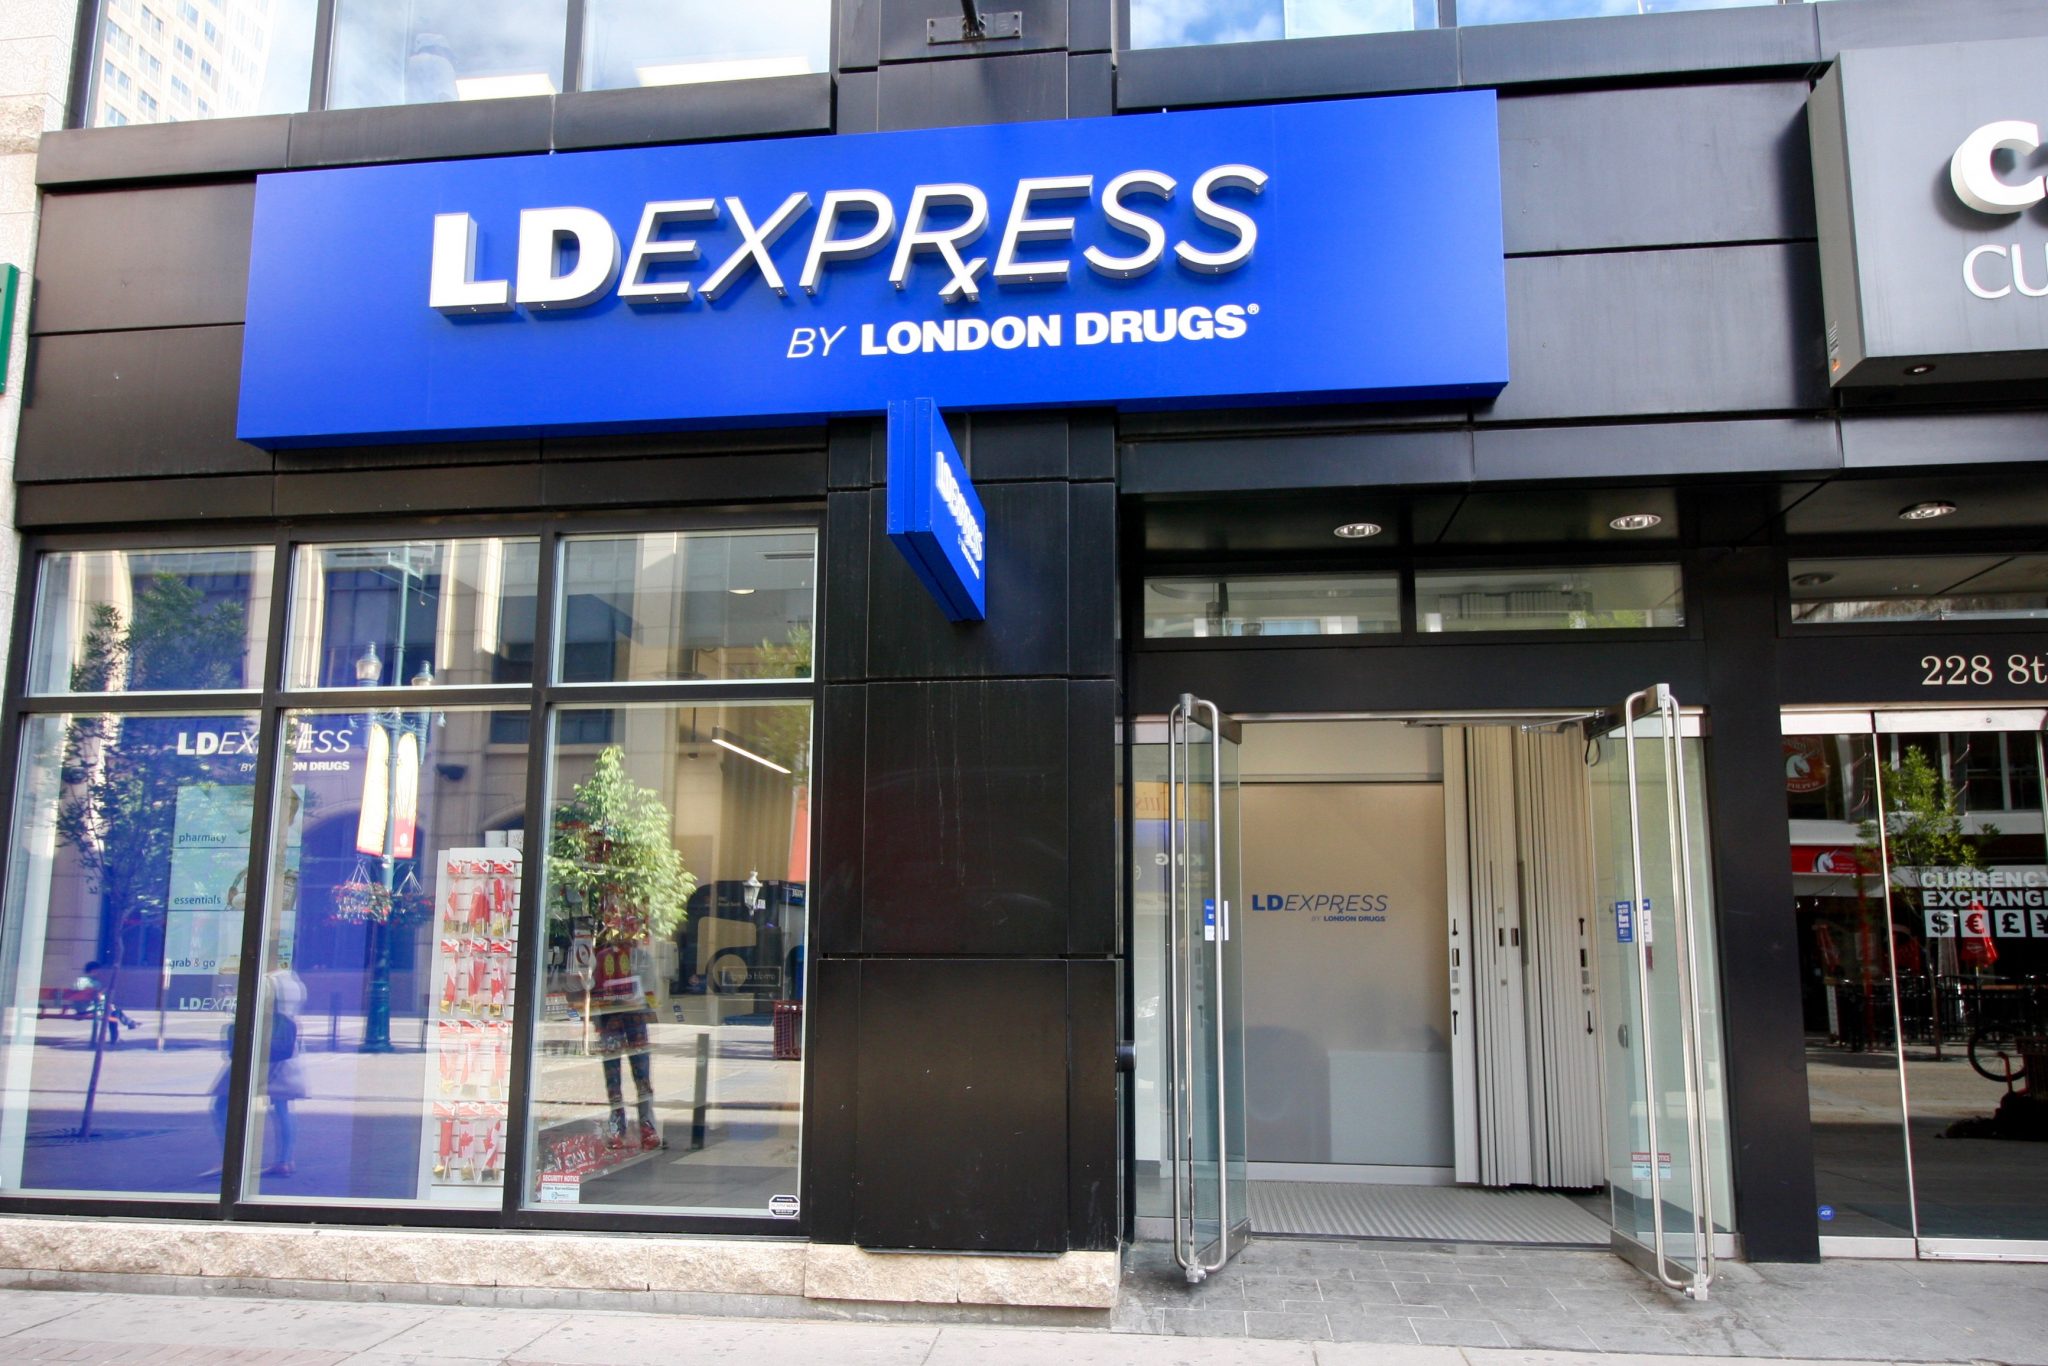 Vancouver-based London Drugs opens first LDEXPRESS urban concept - urbanYVR